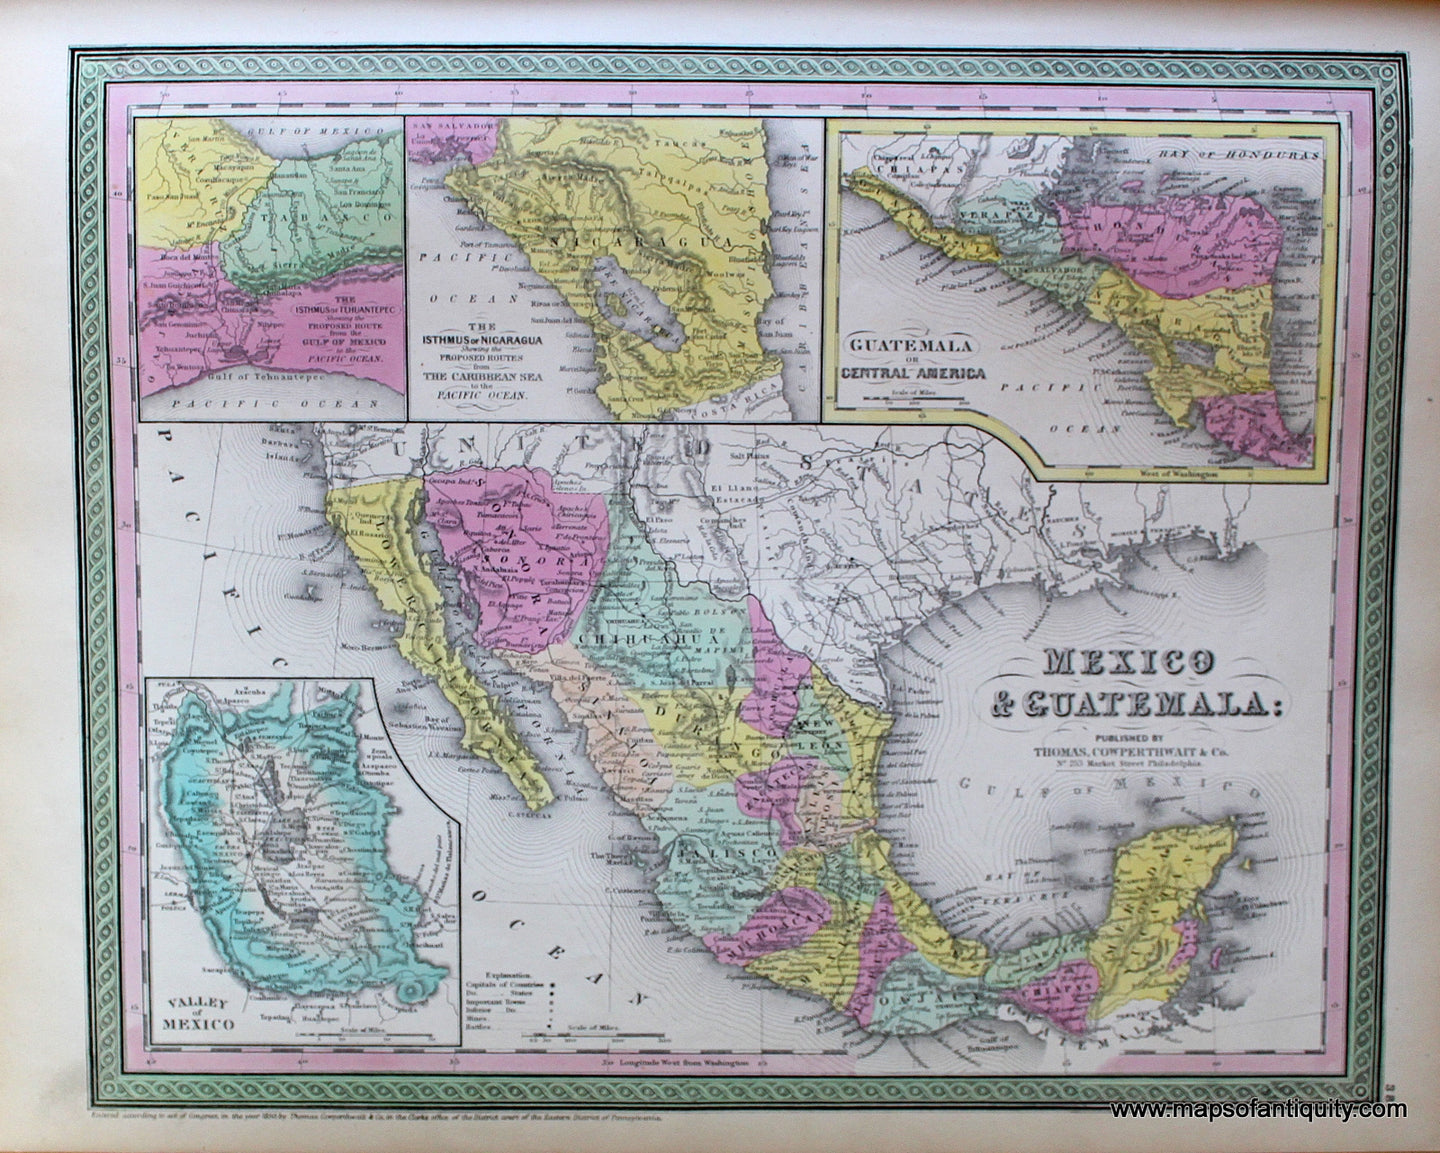 Antique-Hand-Colored-Map-Mexico-&-Guatemala-Mexico--1854-Mitchell-Maps-Of-Antiquity